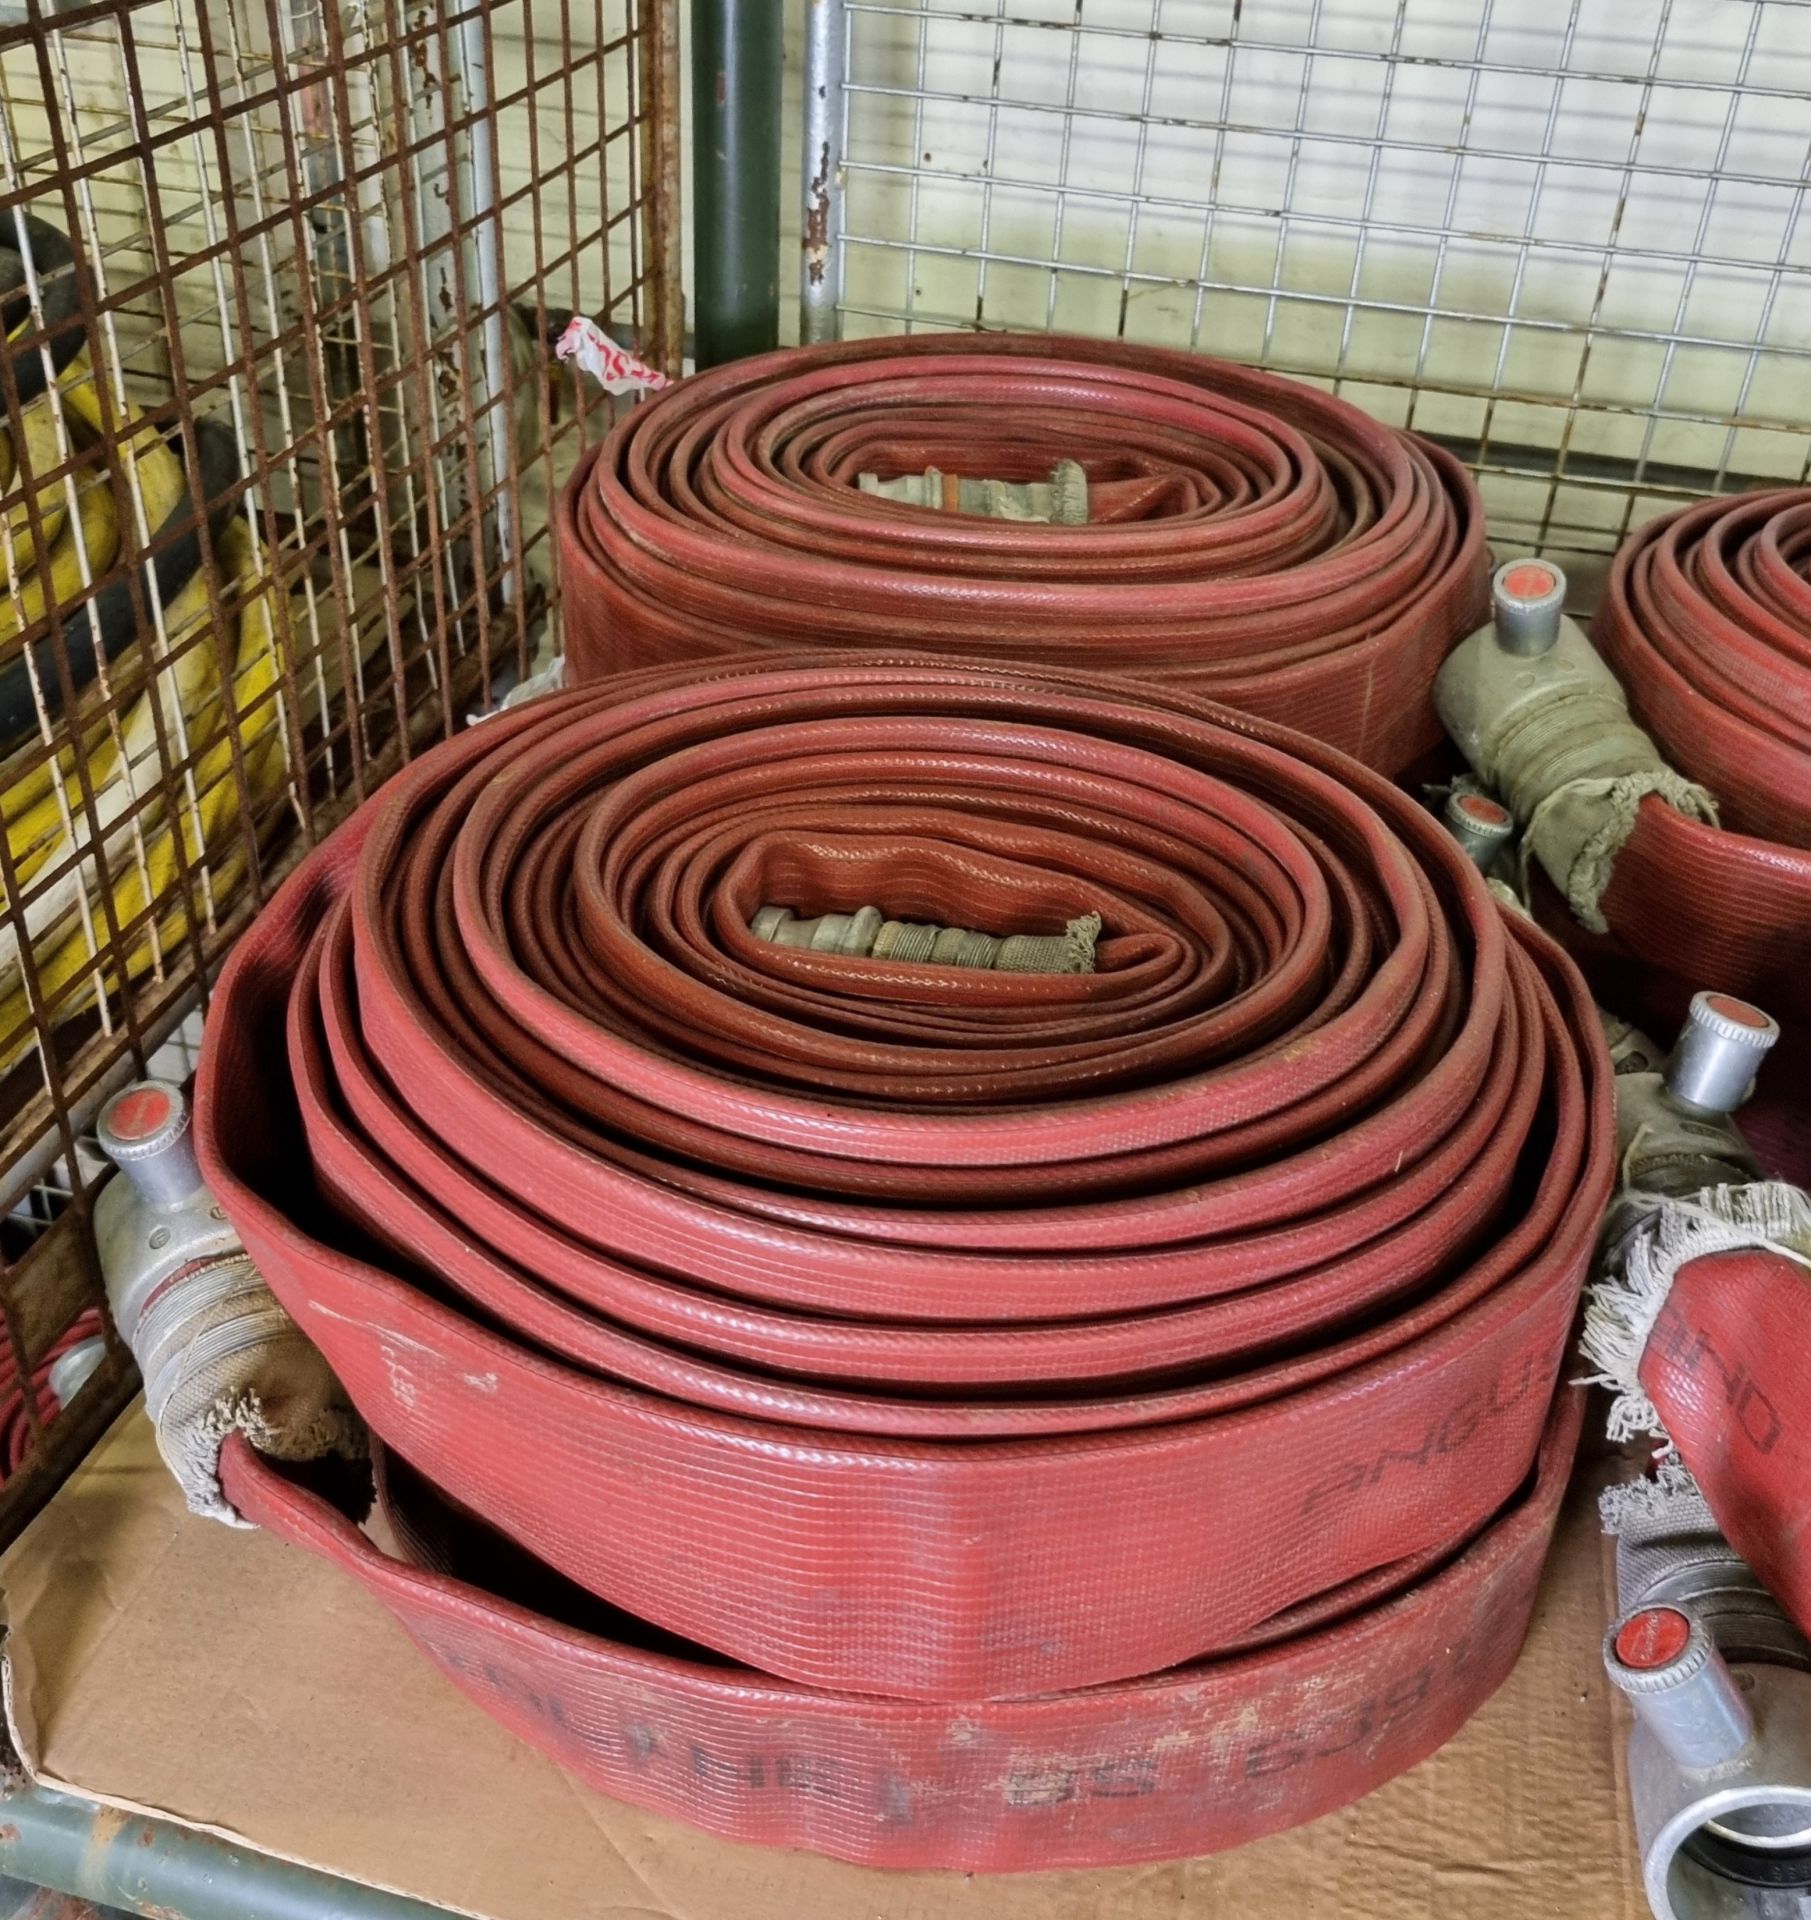 8x Angus Duraline 70mm lay flat hoses with couplings - approx 23 M in length - Bild 4 aus 5